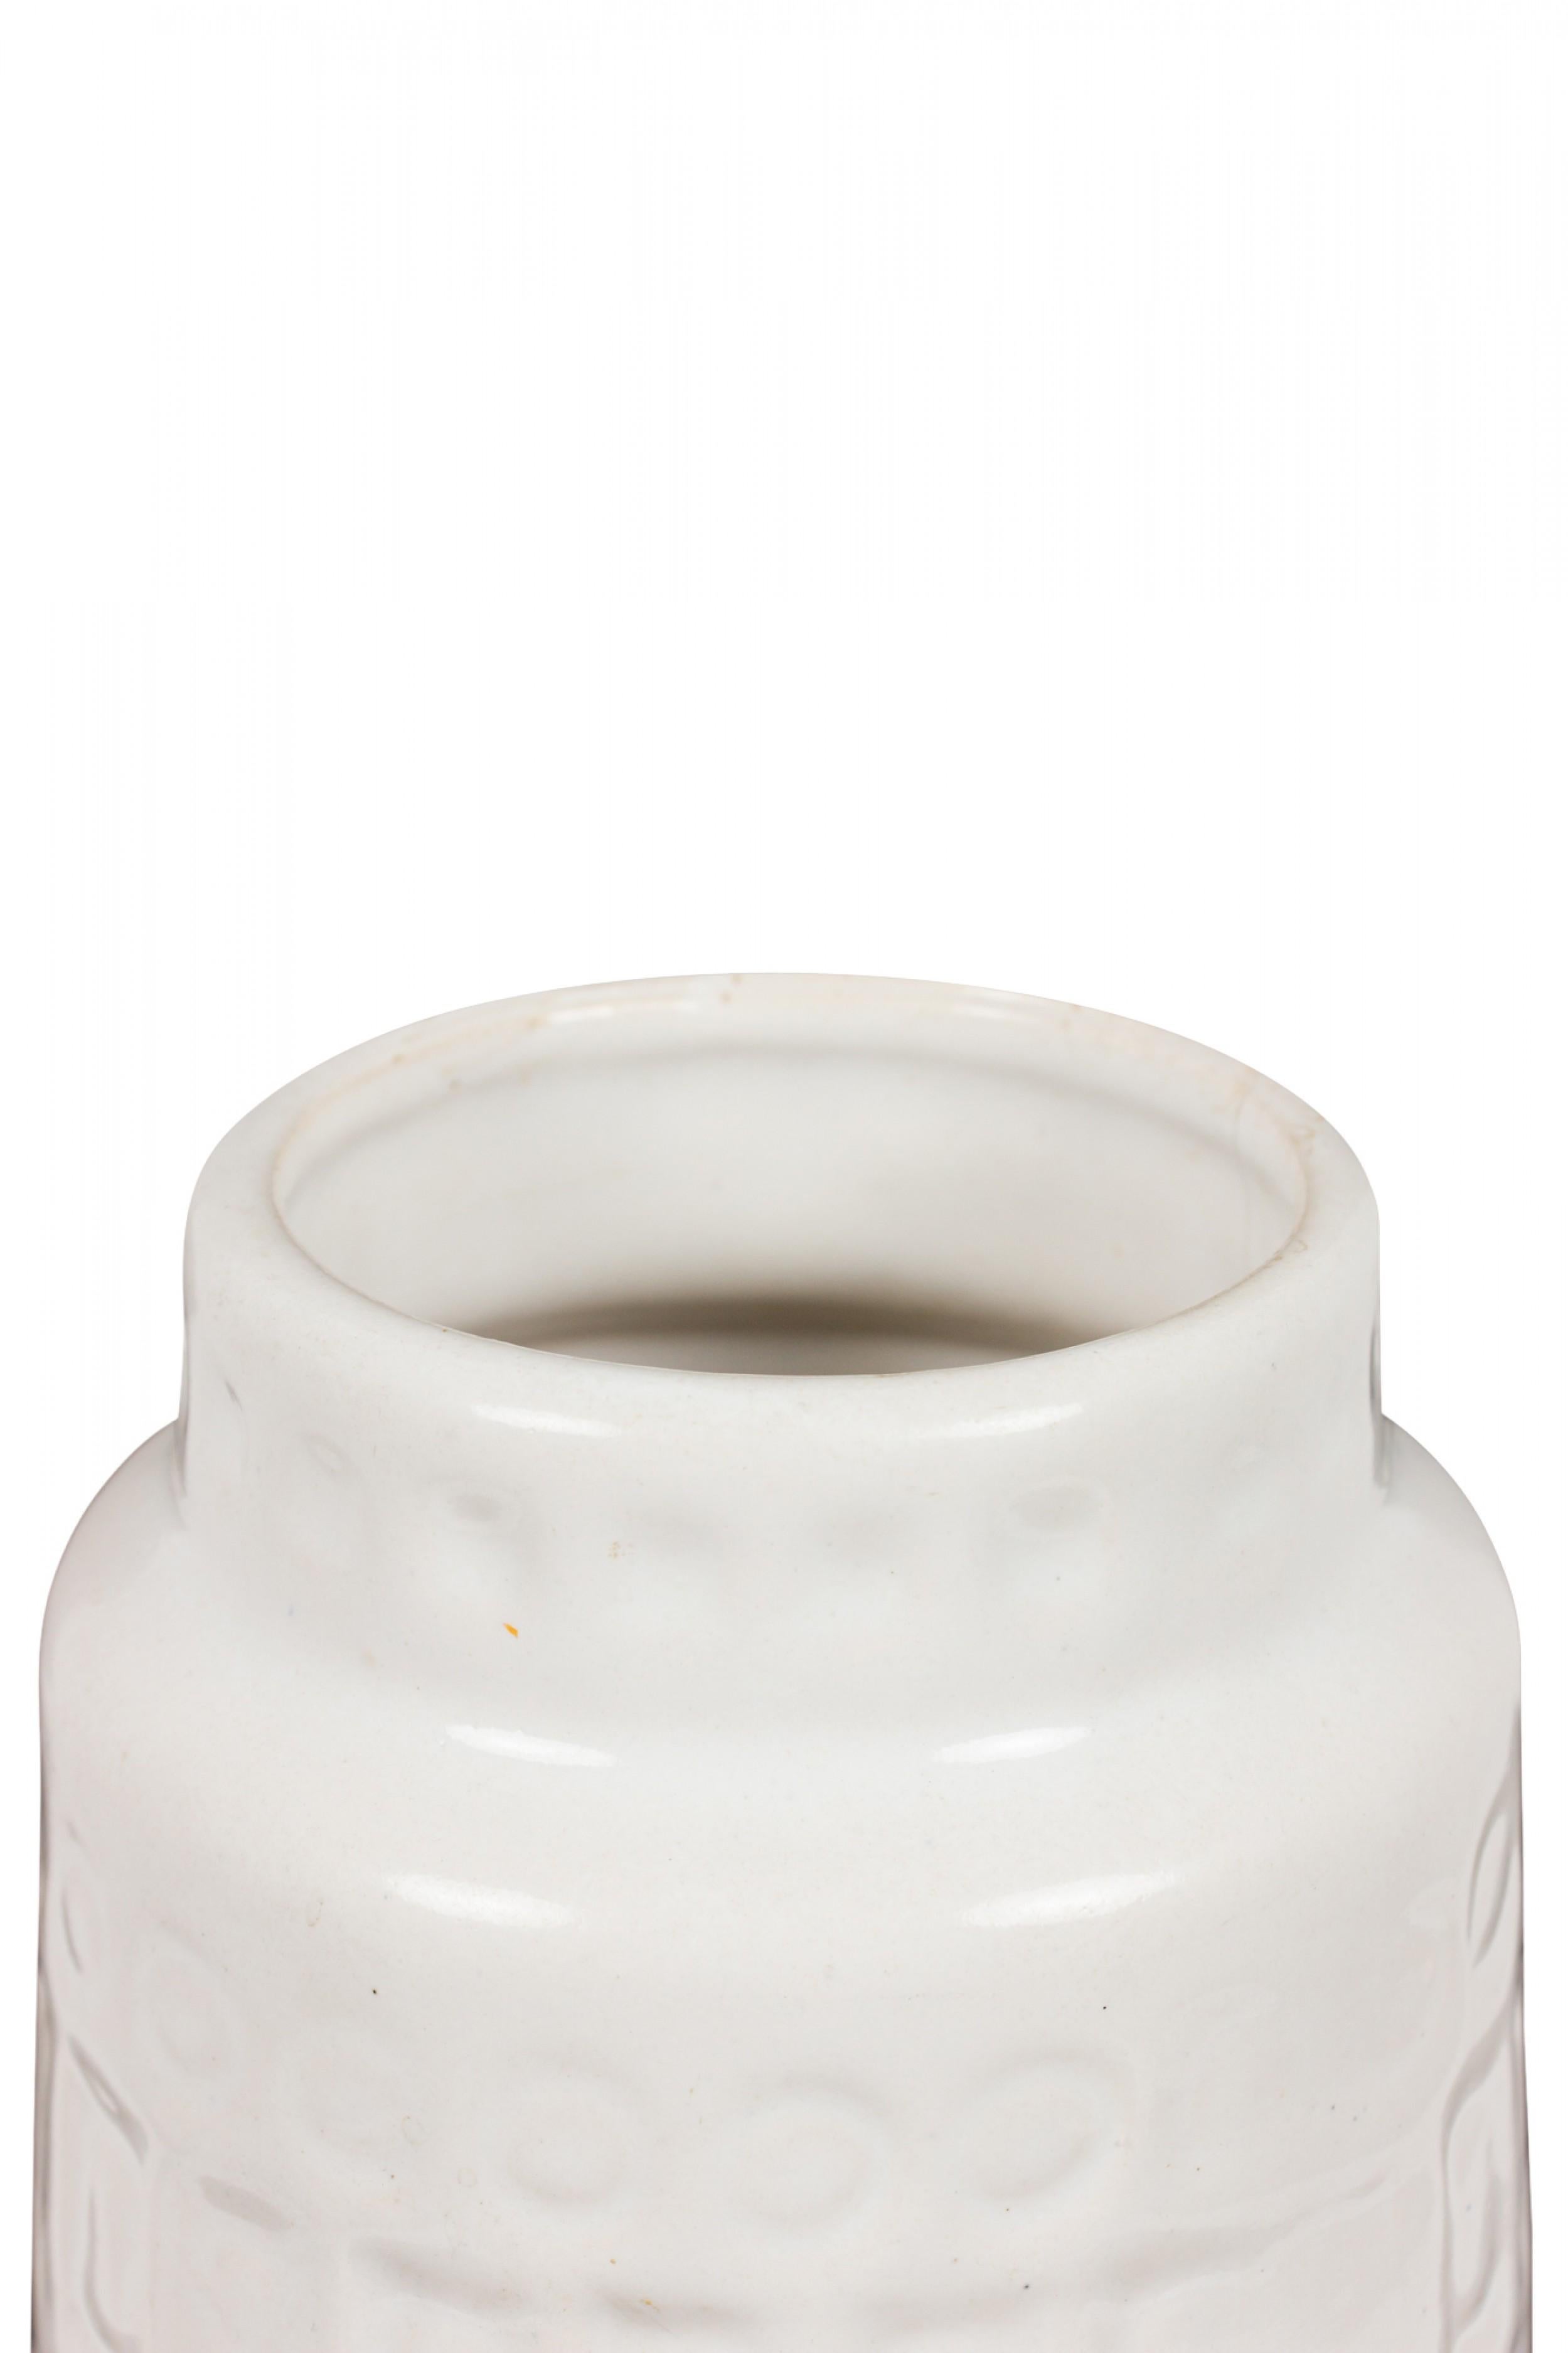 West German mid-century cylindrical white ceramic vase with an incised banded rectangle and circle 'Inka' pattern. (SCHEURICH, mark on bottom, W. GERMANY 260-22).